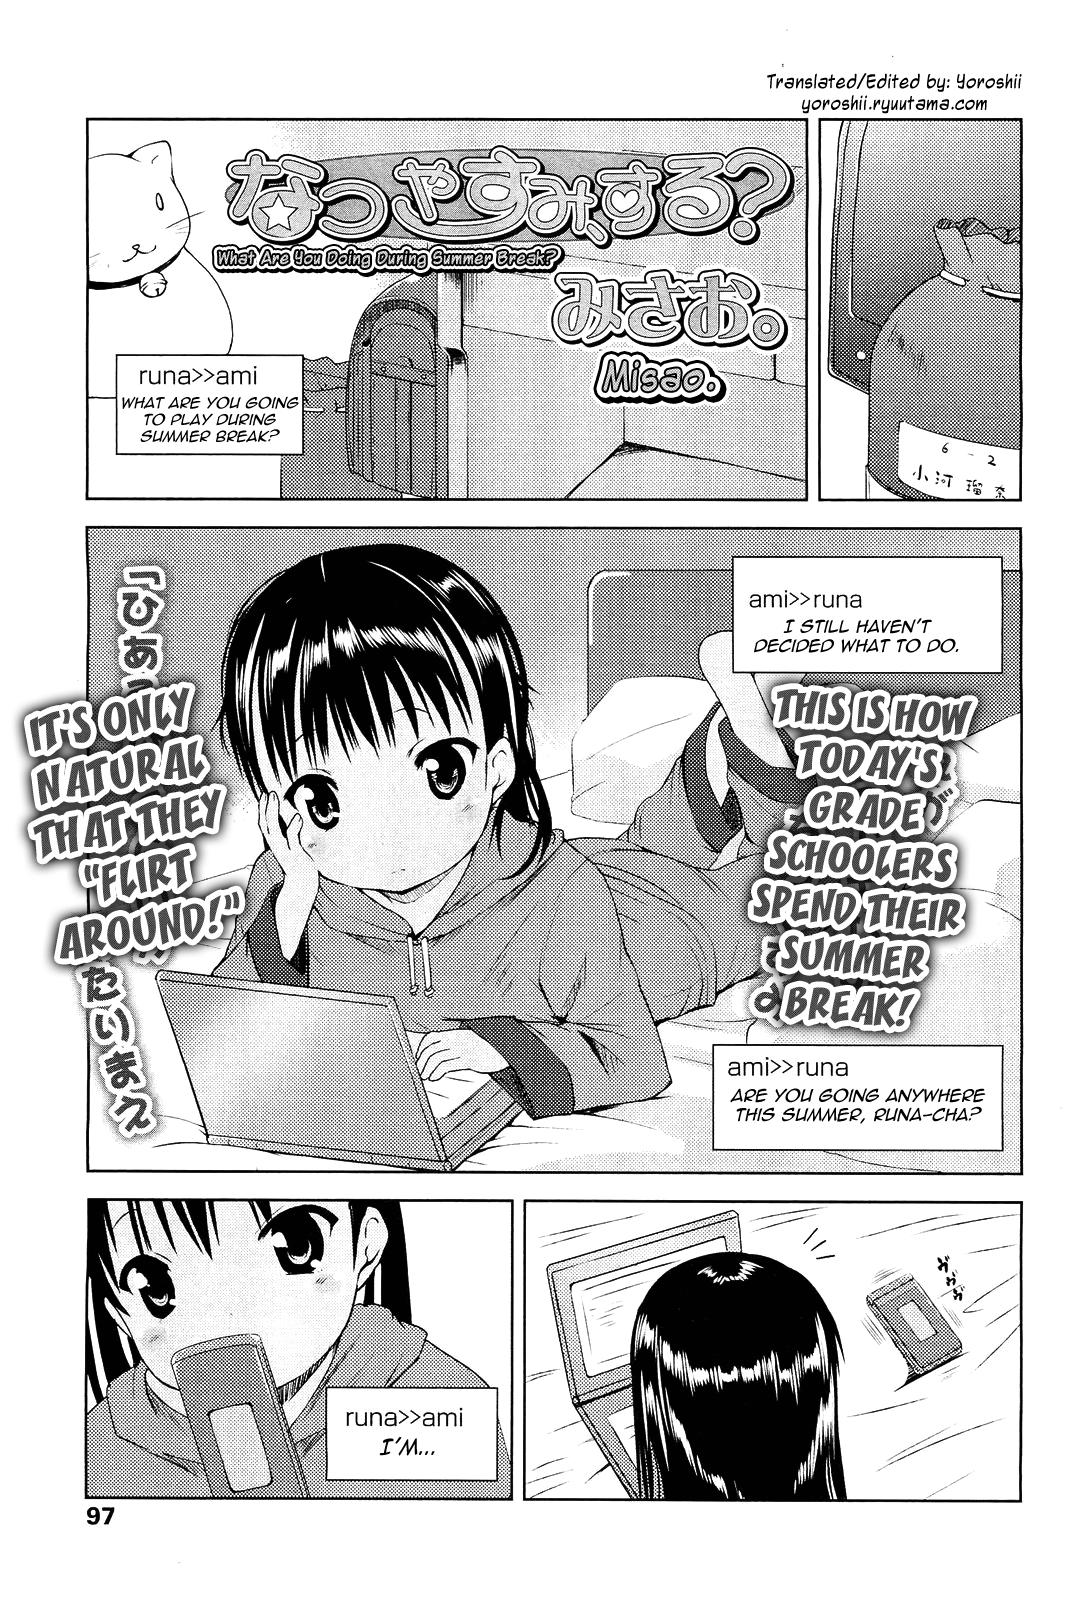 Cuzinho Natsuyasumi, Suru? | What Are You Doing During Summer Break? Moms - Page 1